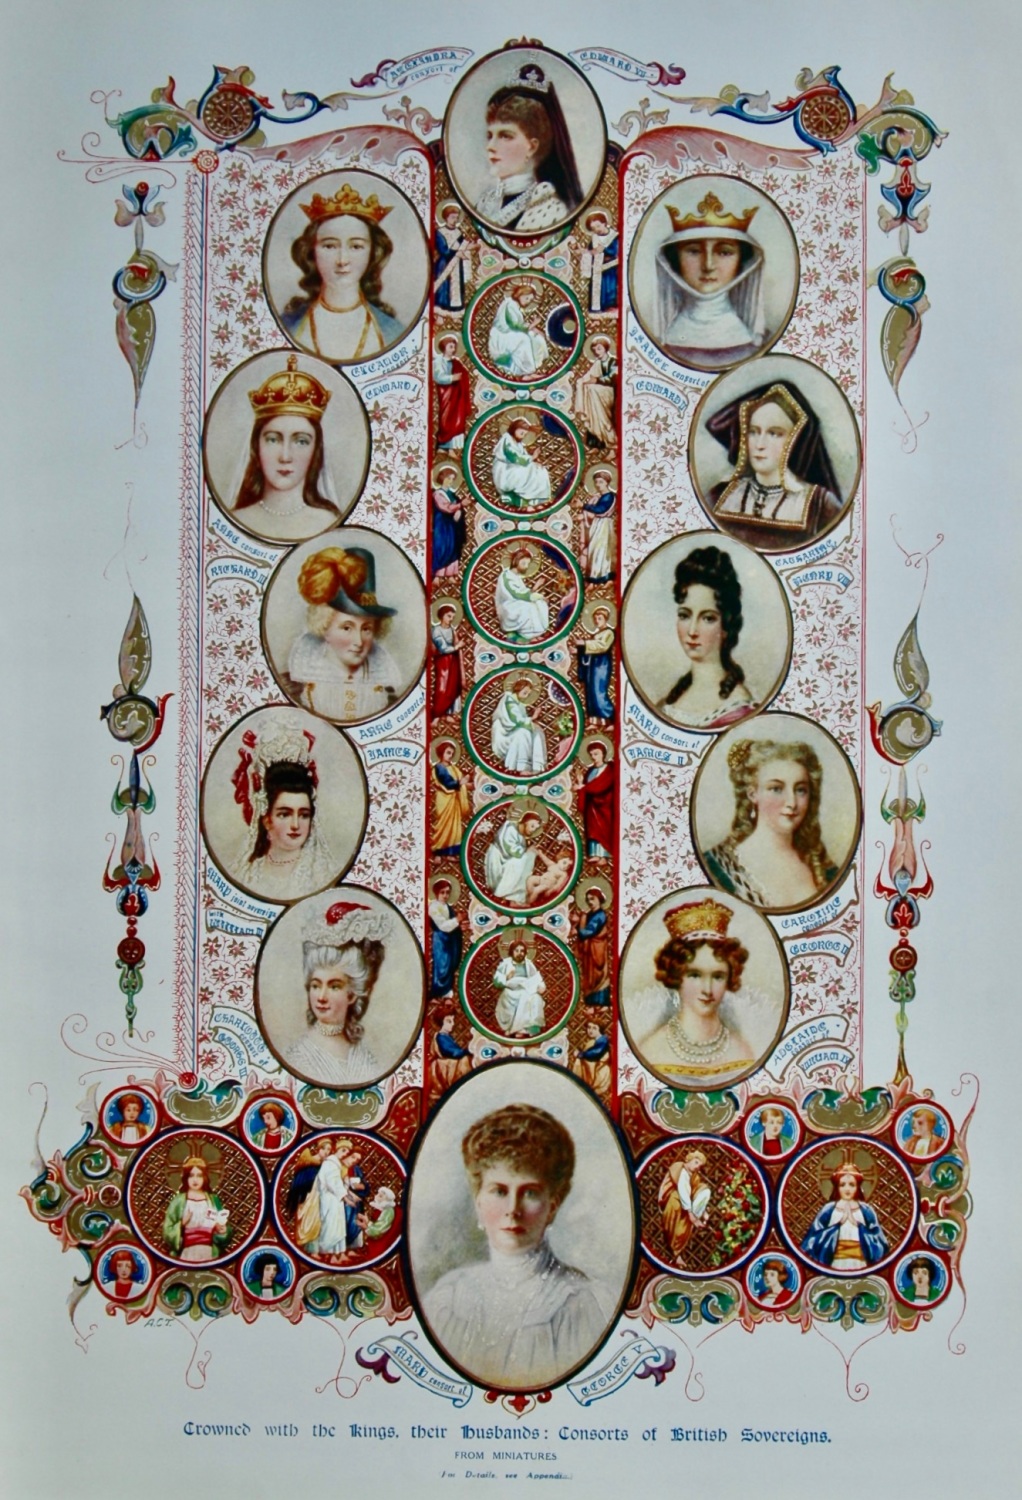 Crowned with the Kings, their husbands : Consorts of British Sovereigns.  1